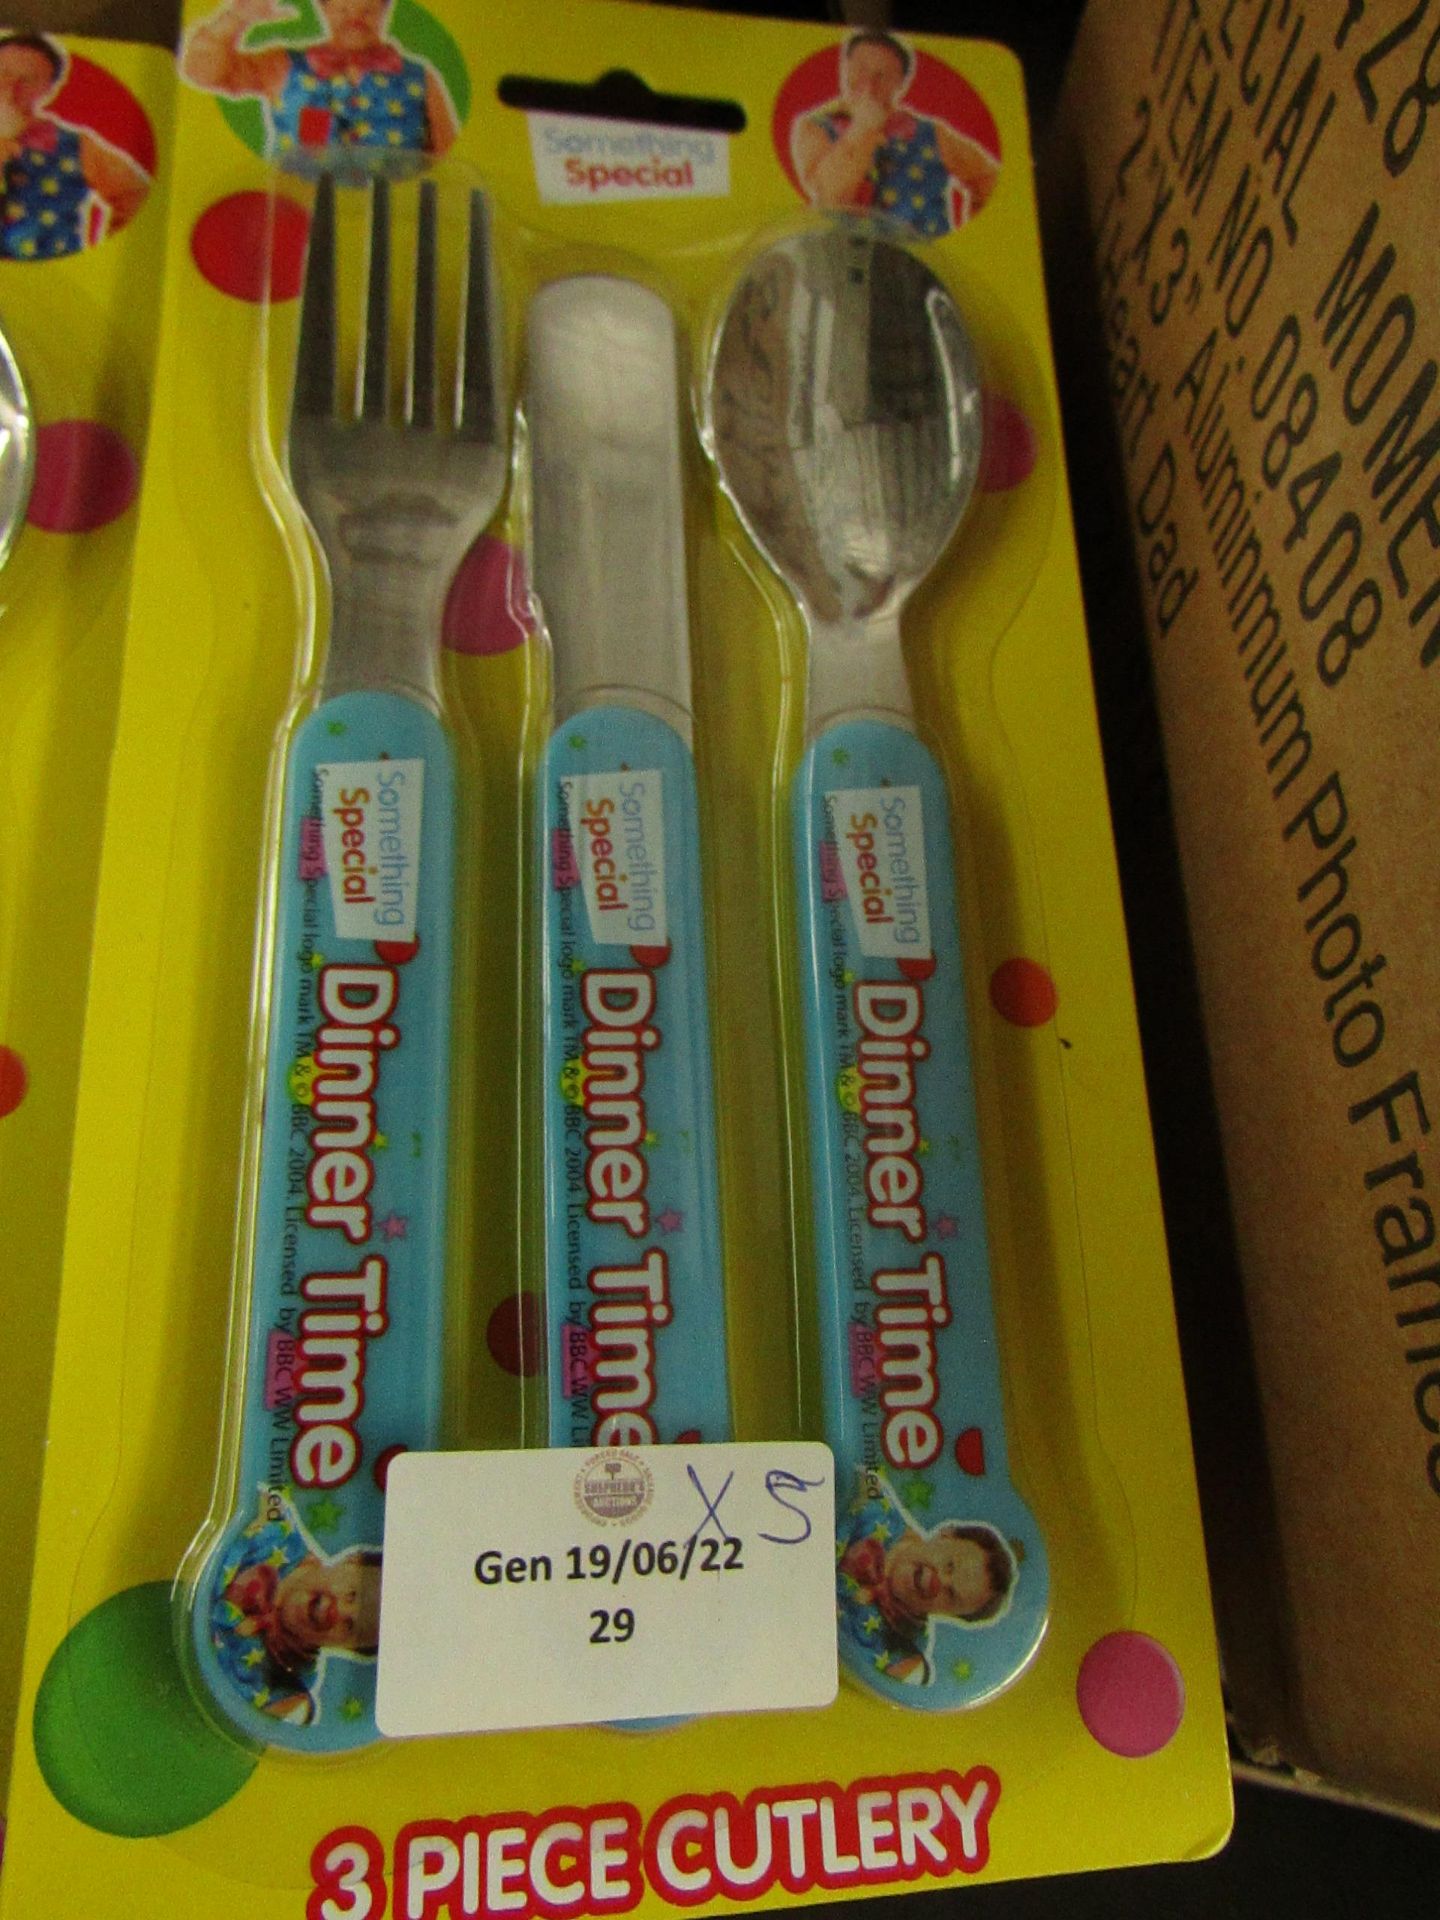 5x Something Special - Mr Tumble 3-Piece Cutlery Sets - Unused & Packaged.